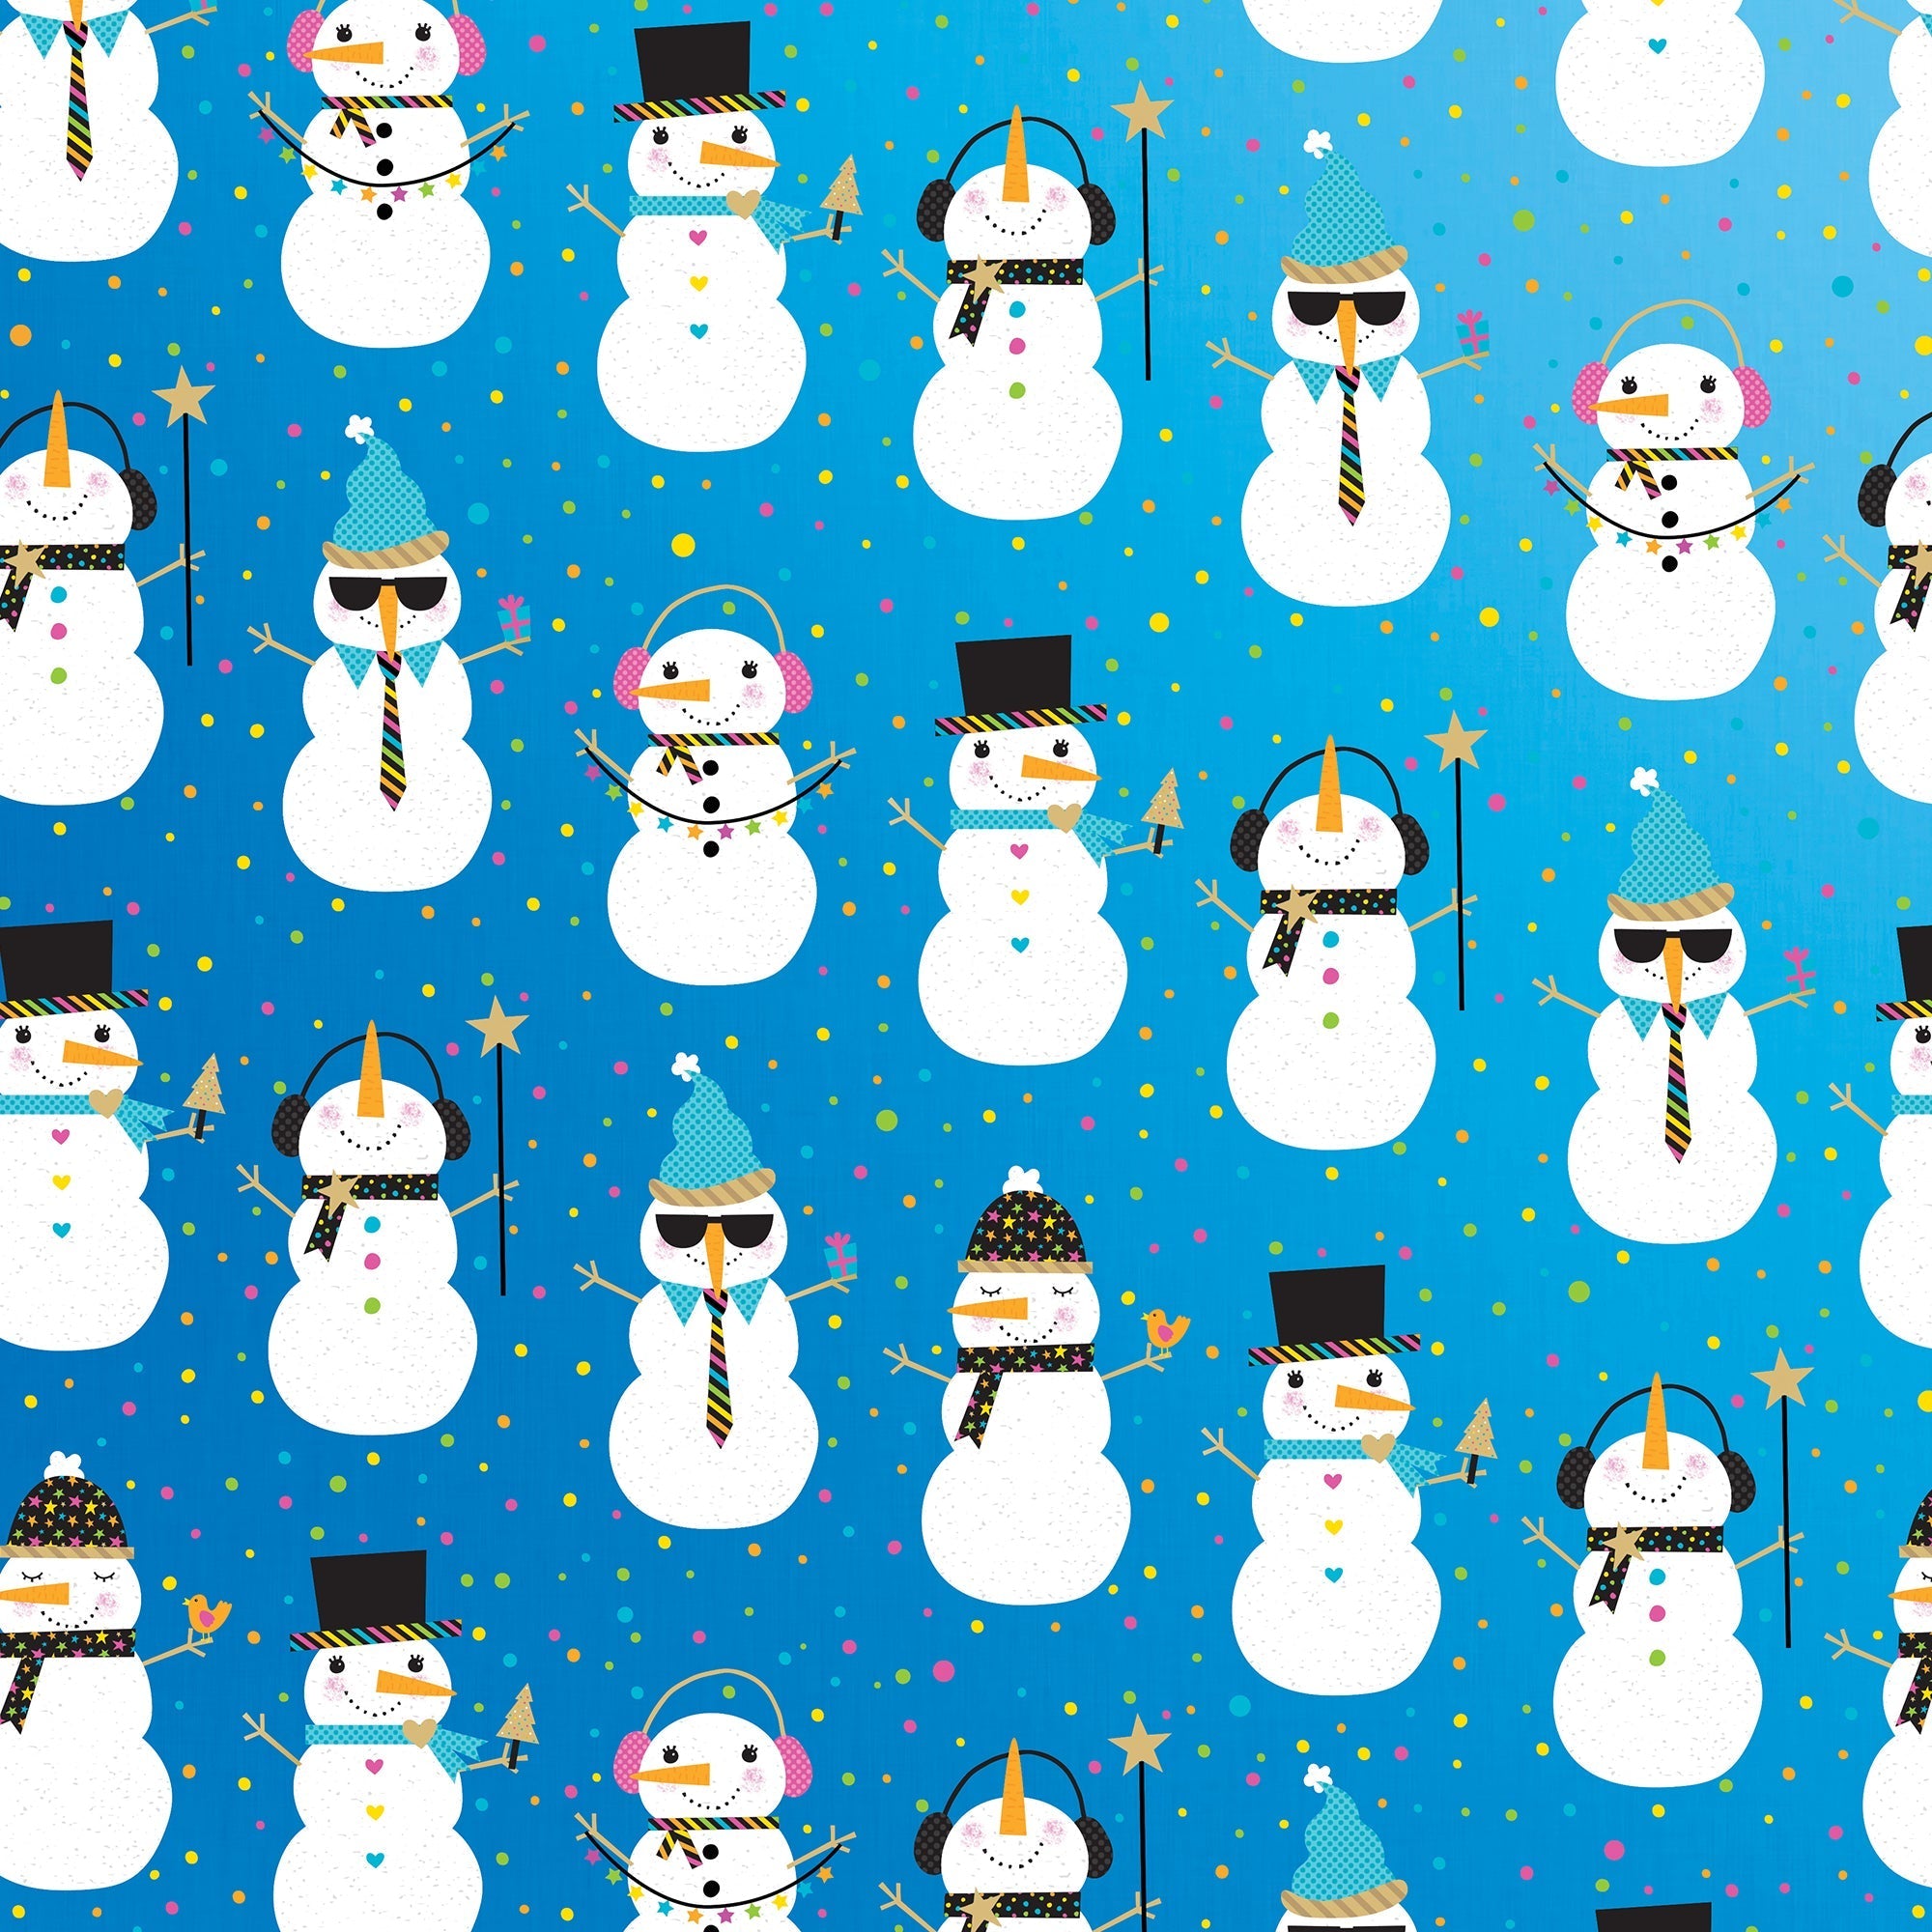 Whimsical Christmas Wrapping Paper Roll Bundle (25 sq ft per roll, 100 total sq ft), 4 Pack